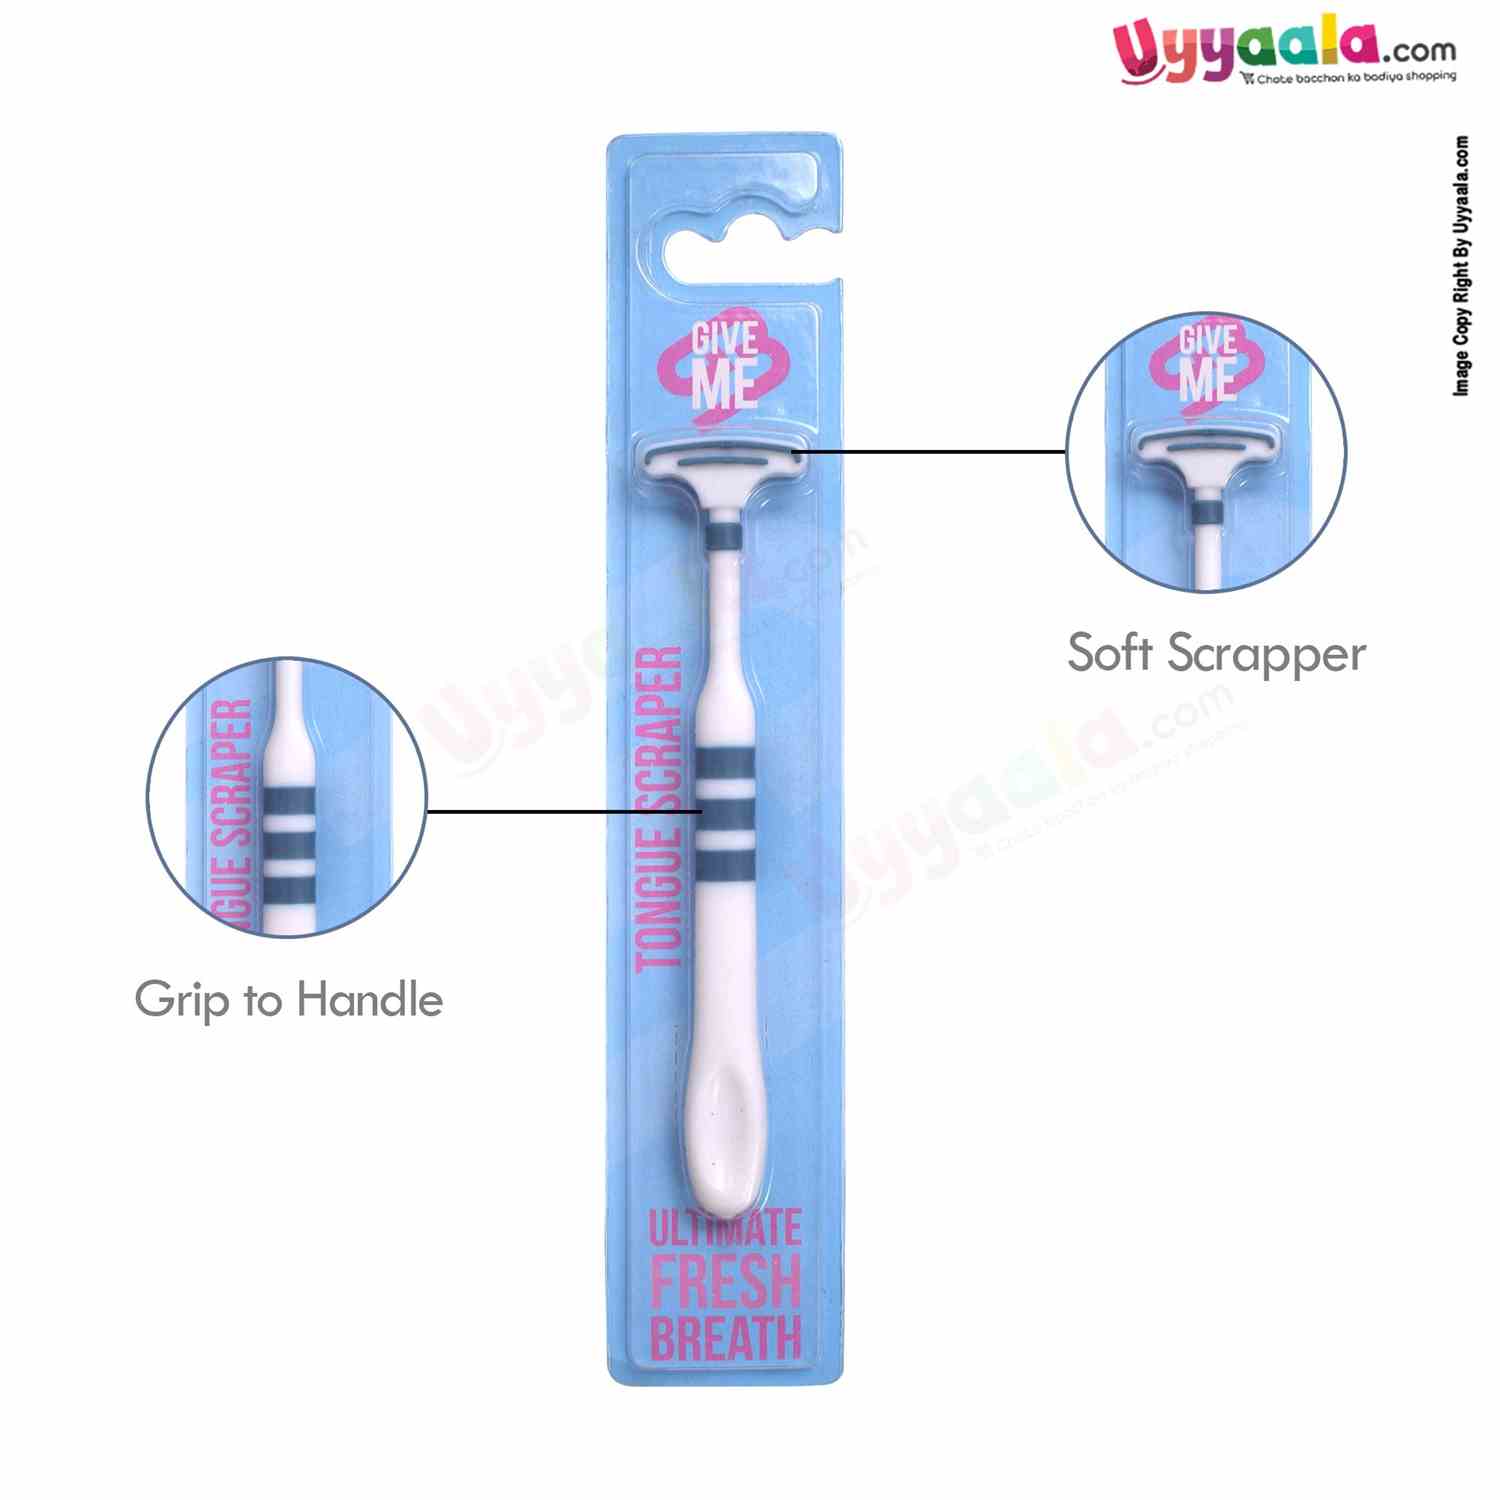 GIVE ME baby Tongue Scraper for Fresh Breath Pack of 2, 10+m age - White, Green